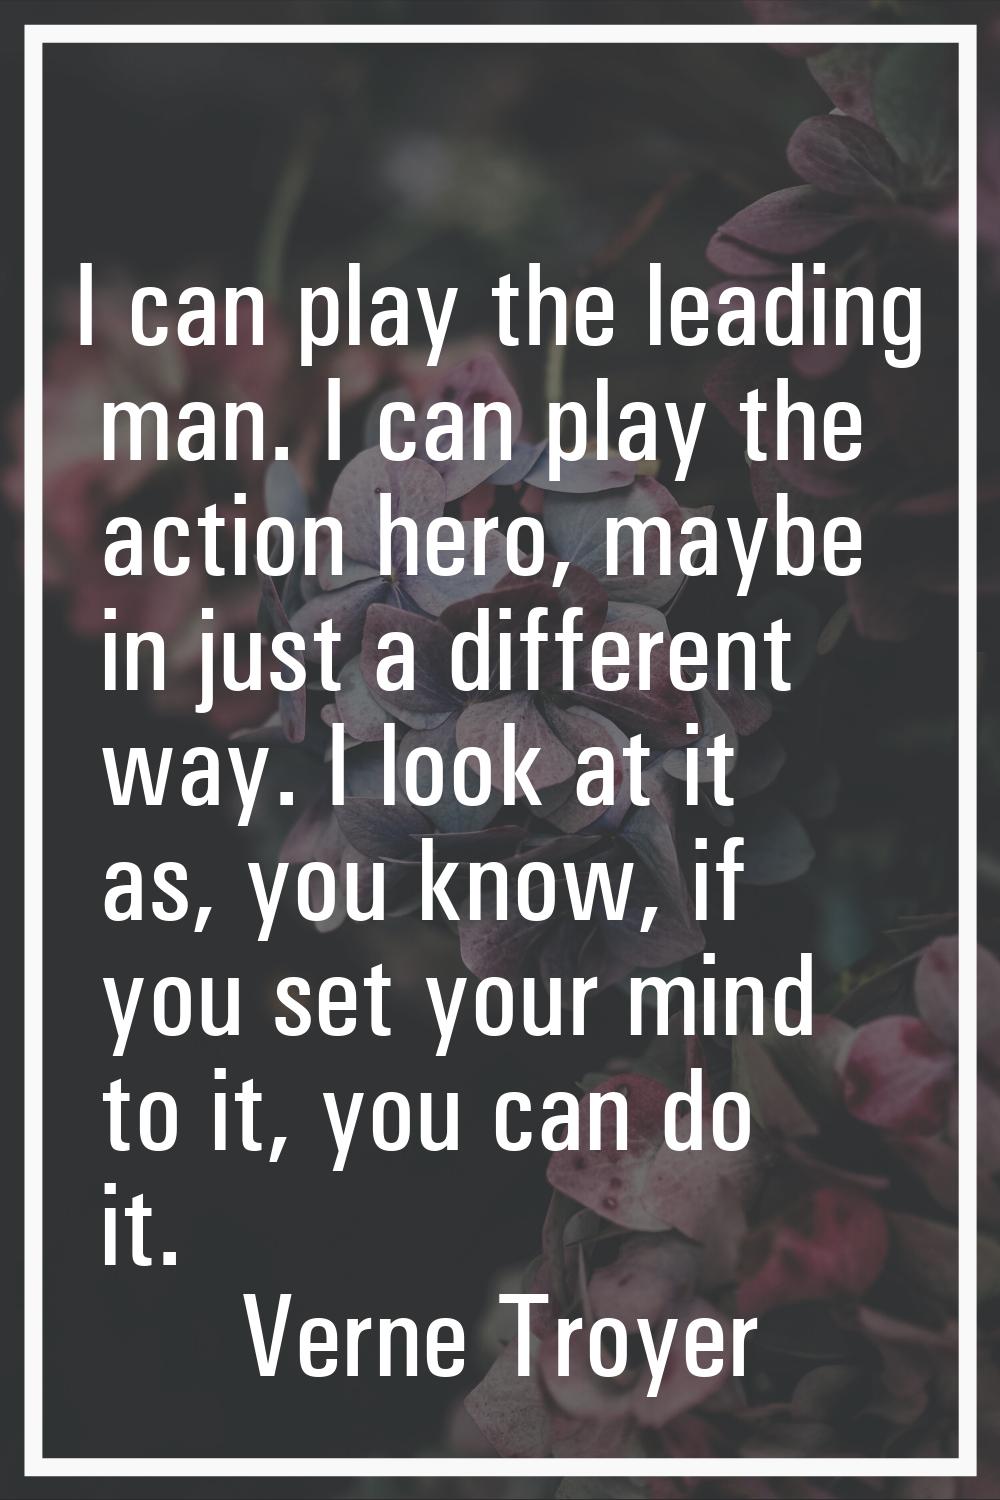 I can play the leading man. I can play the action hero, maybe in just a different way. I look at it